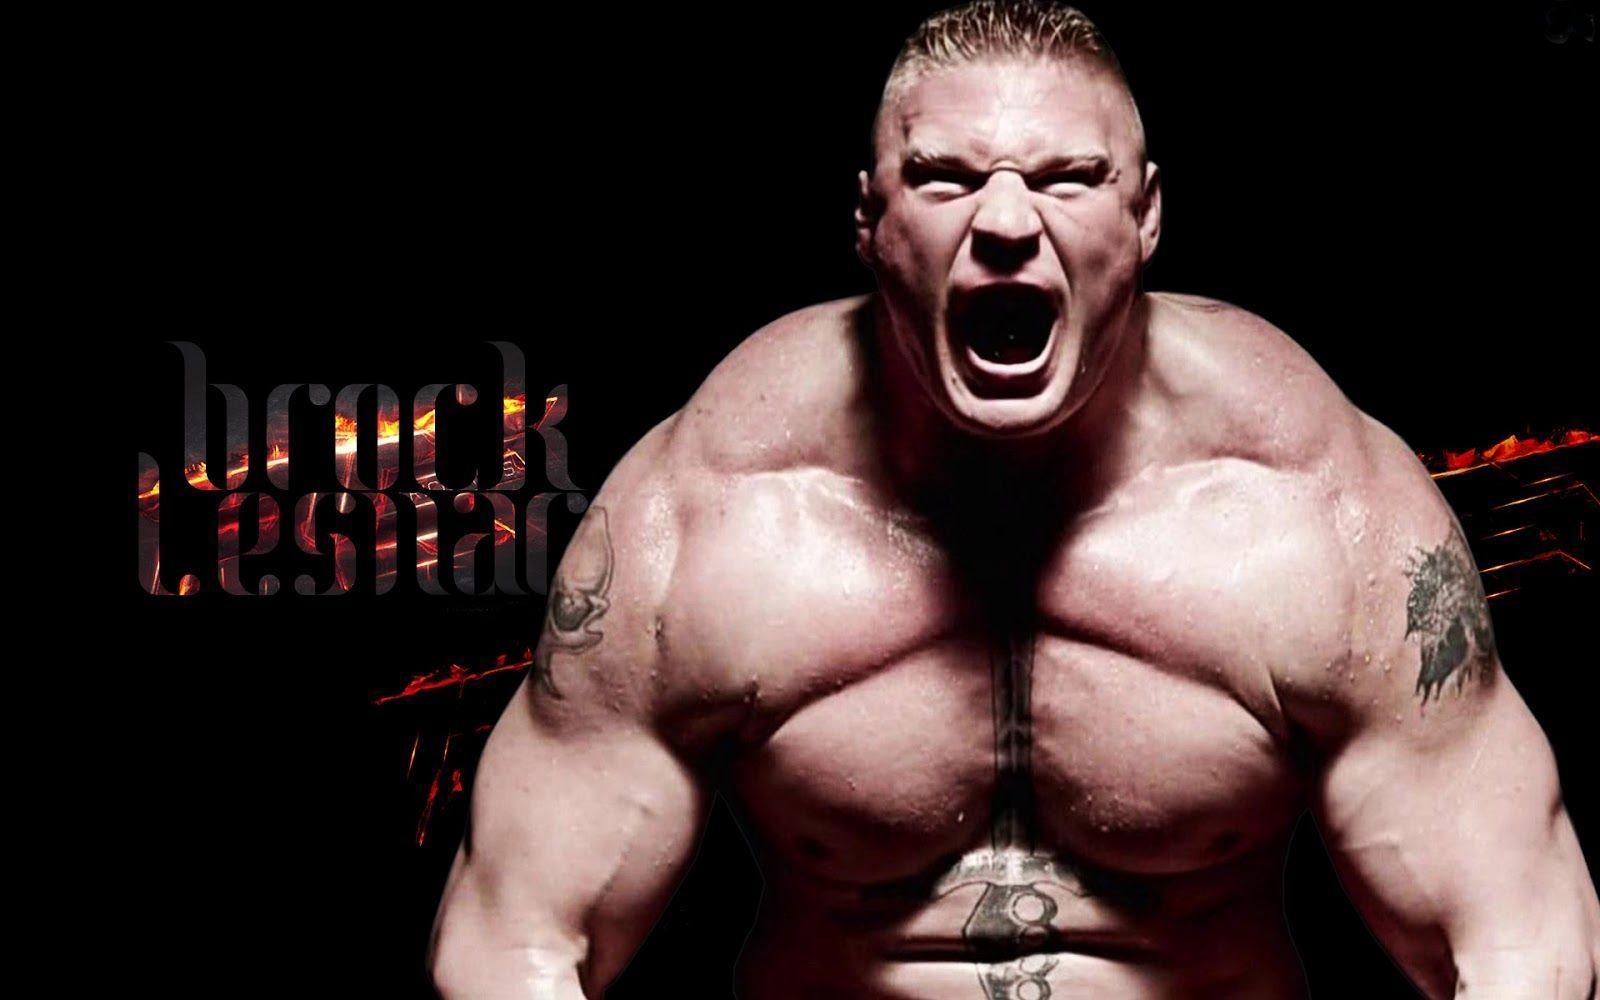 brock lesnar wallpapers – 1600×1000 High Definition Wallpapers